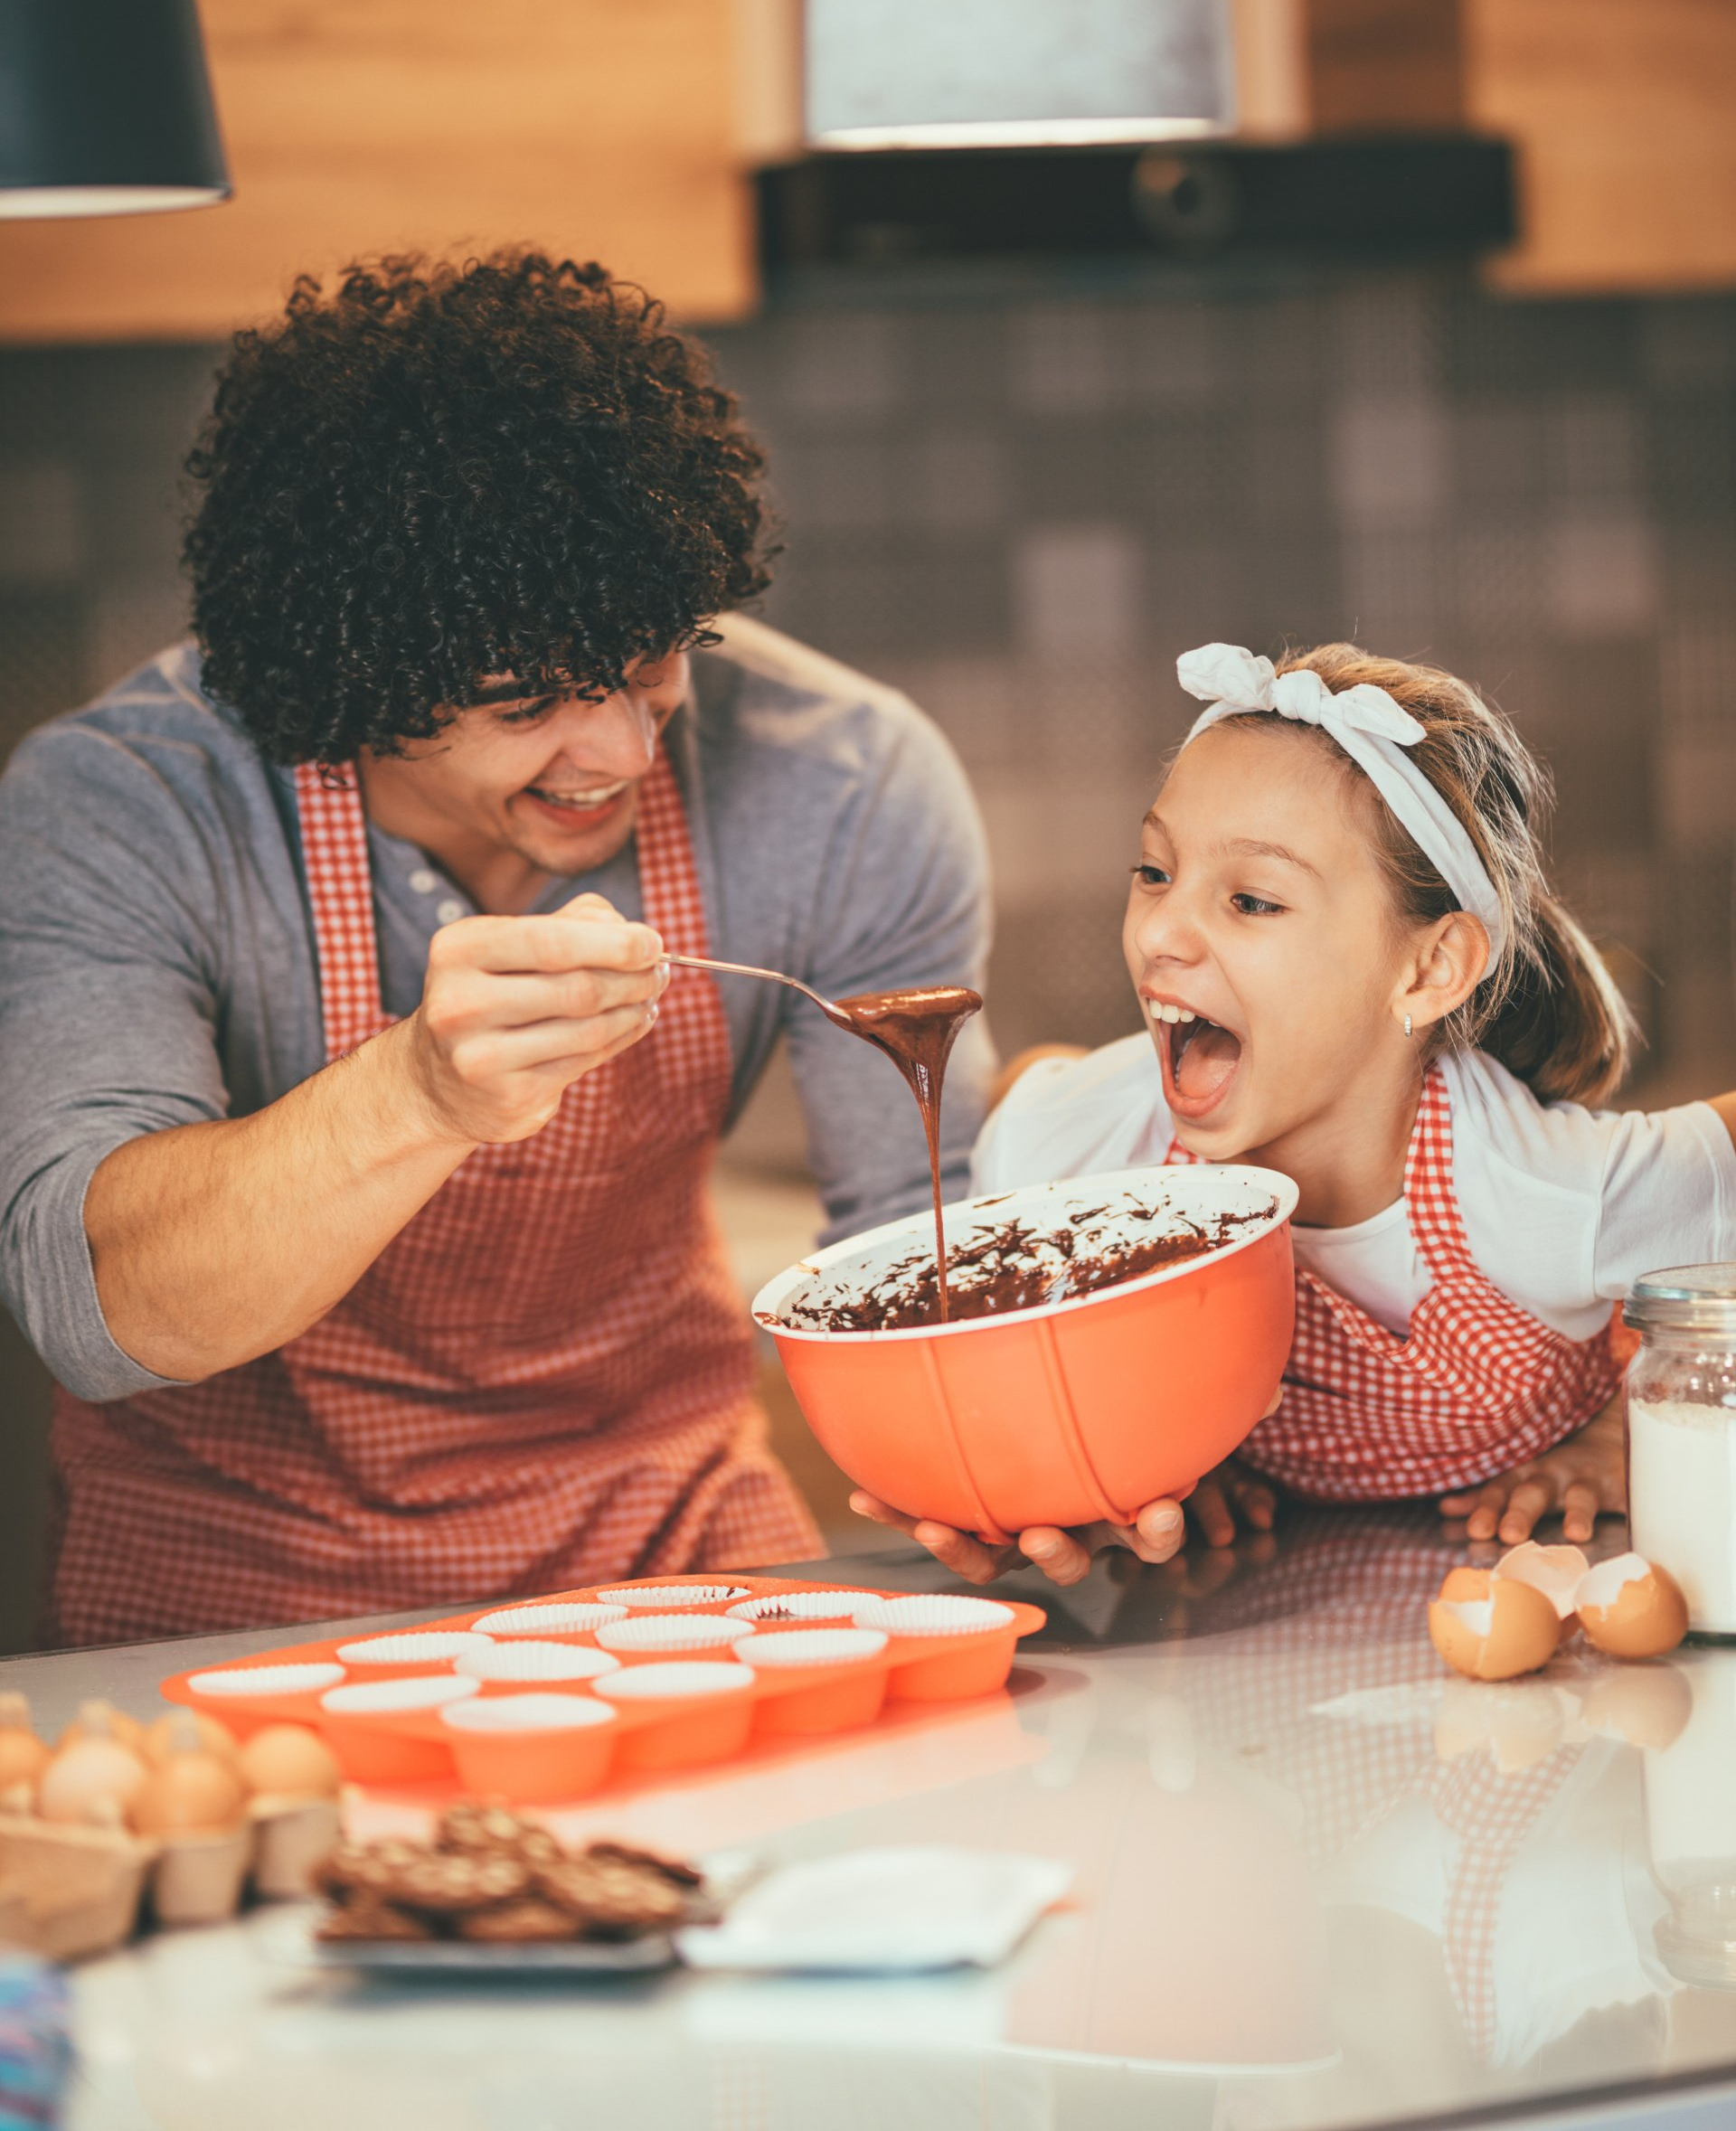 A father and daughter bonding while baking cupcakes. The dad is stirring the batter while the daughter looks on with excitement. Both are wearing aprons and have big smiles, showing the love and connection they share in this special moment.